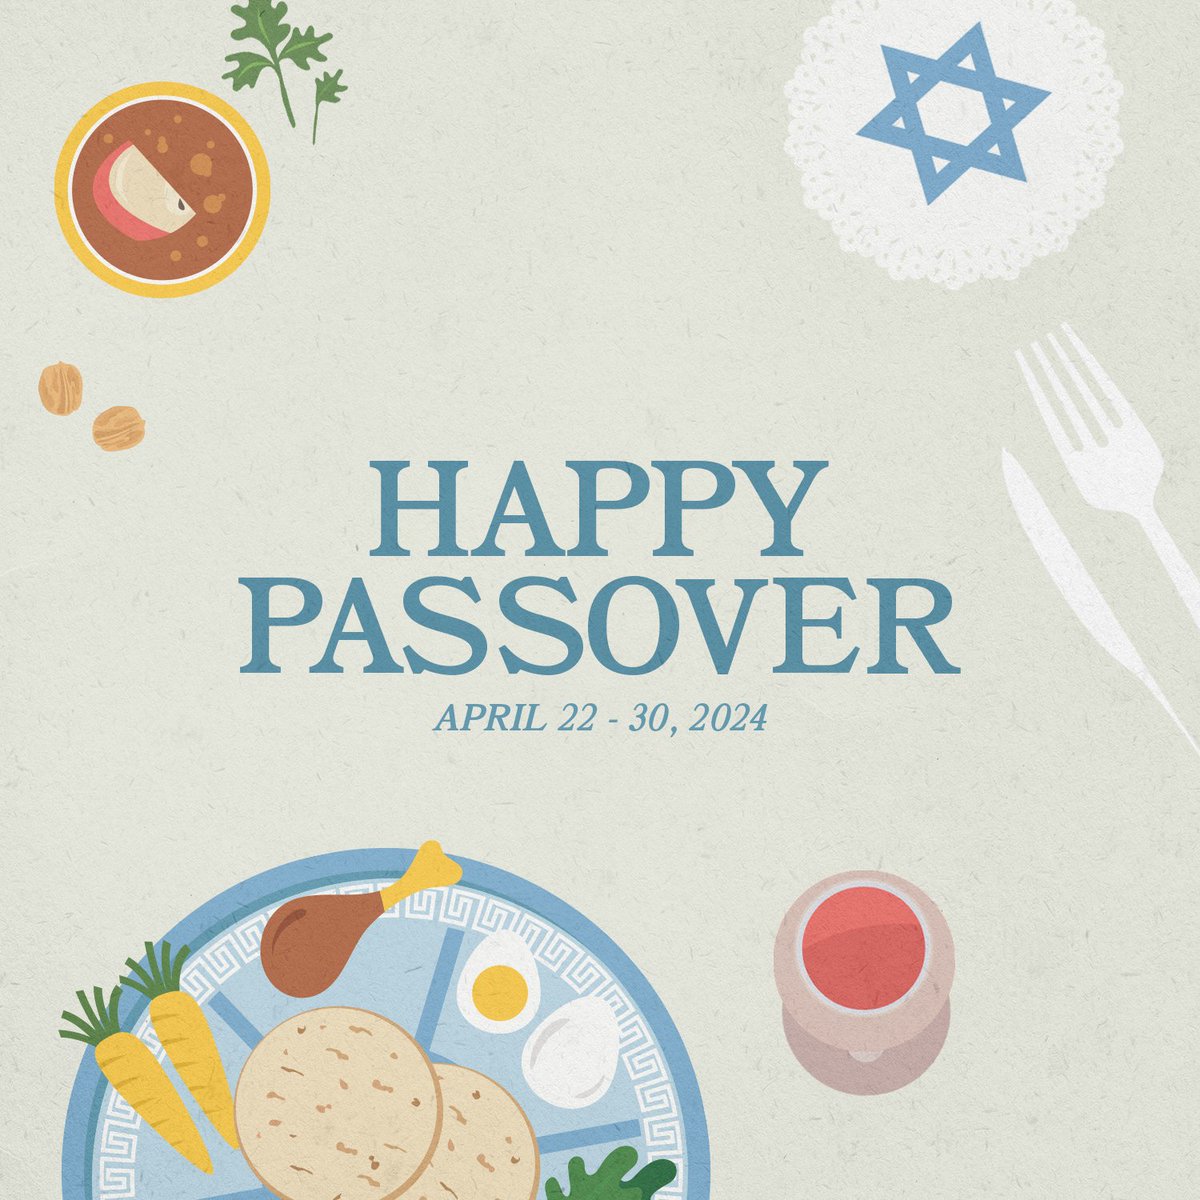 Wishing blessings on all who are observing and celebrating Passover. Thinking especially of those still being held hostage by Hamas terrorists, and the families and loved ones who will see another holiday come and go without them there. America stands with you. 🇮🇱